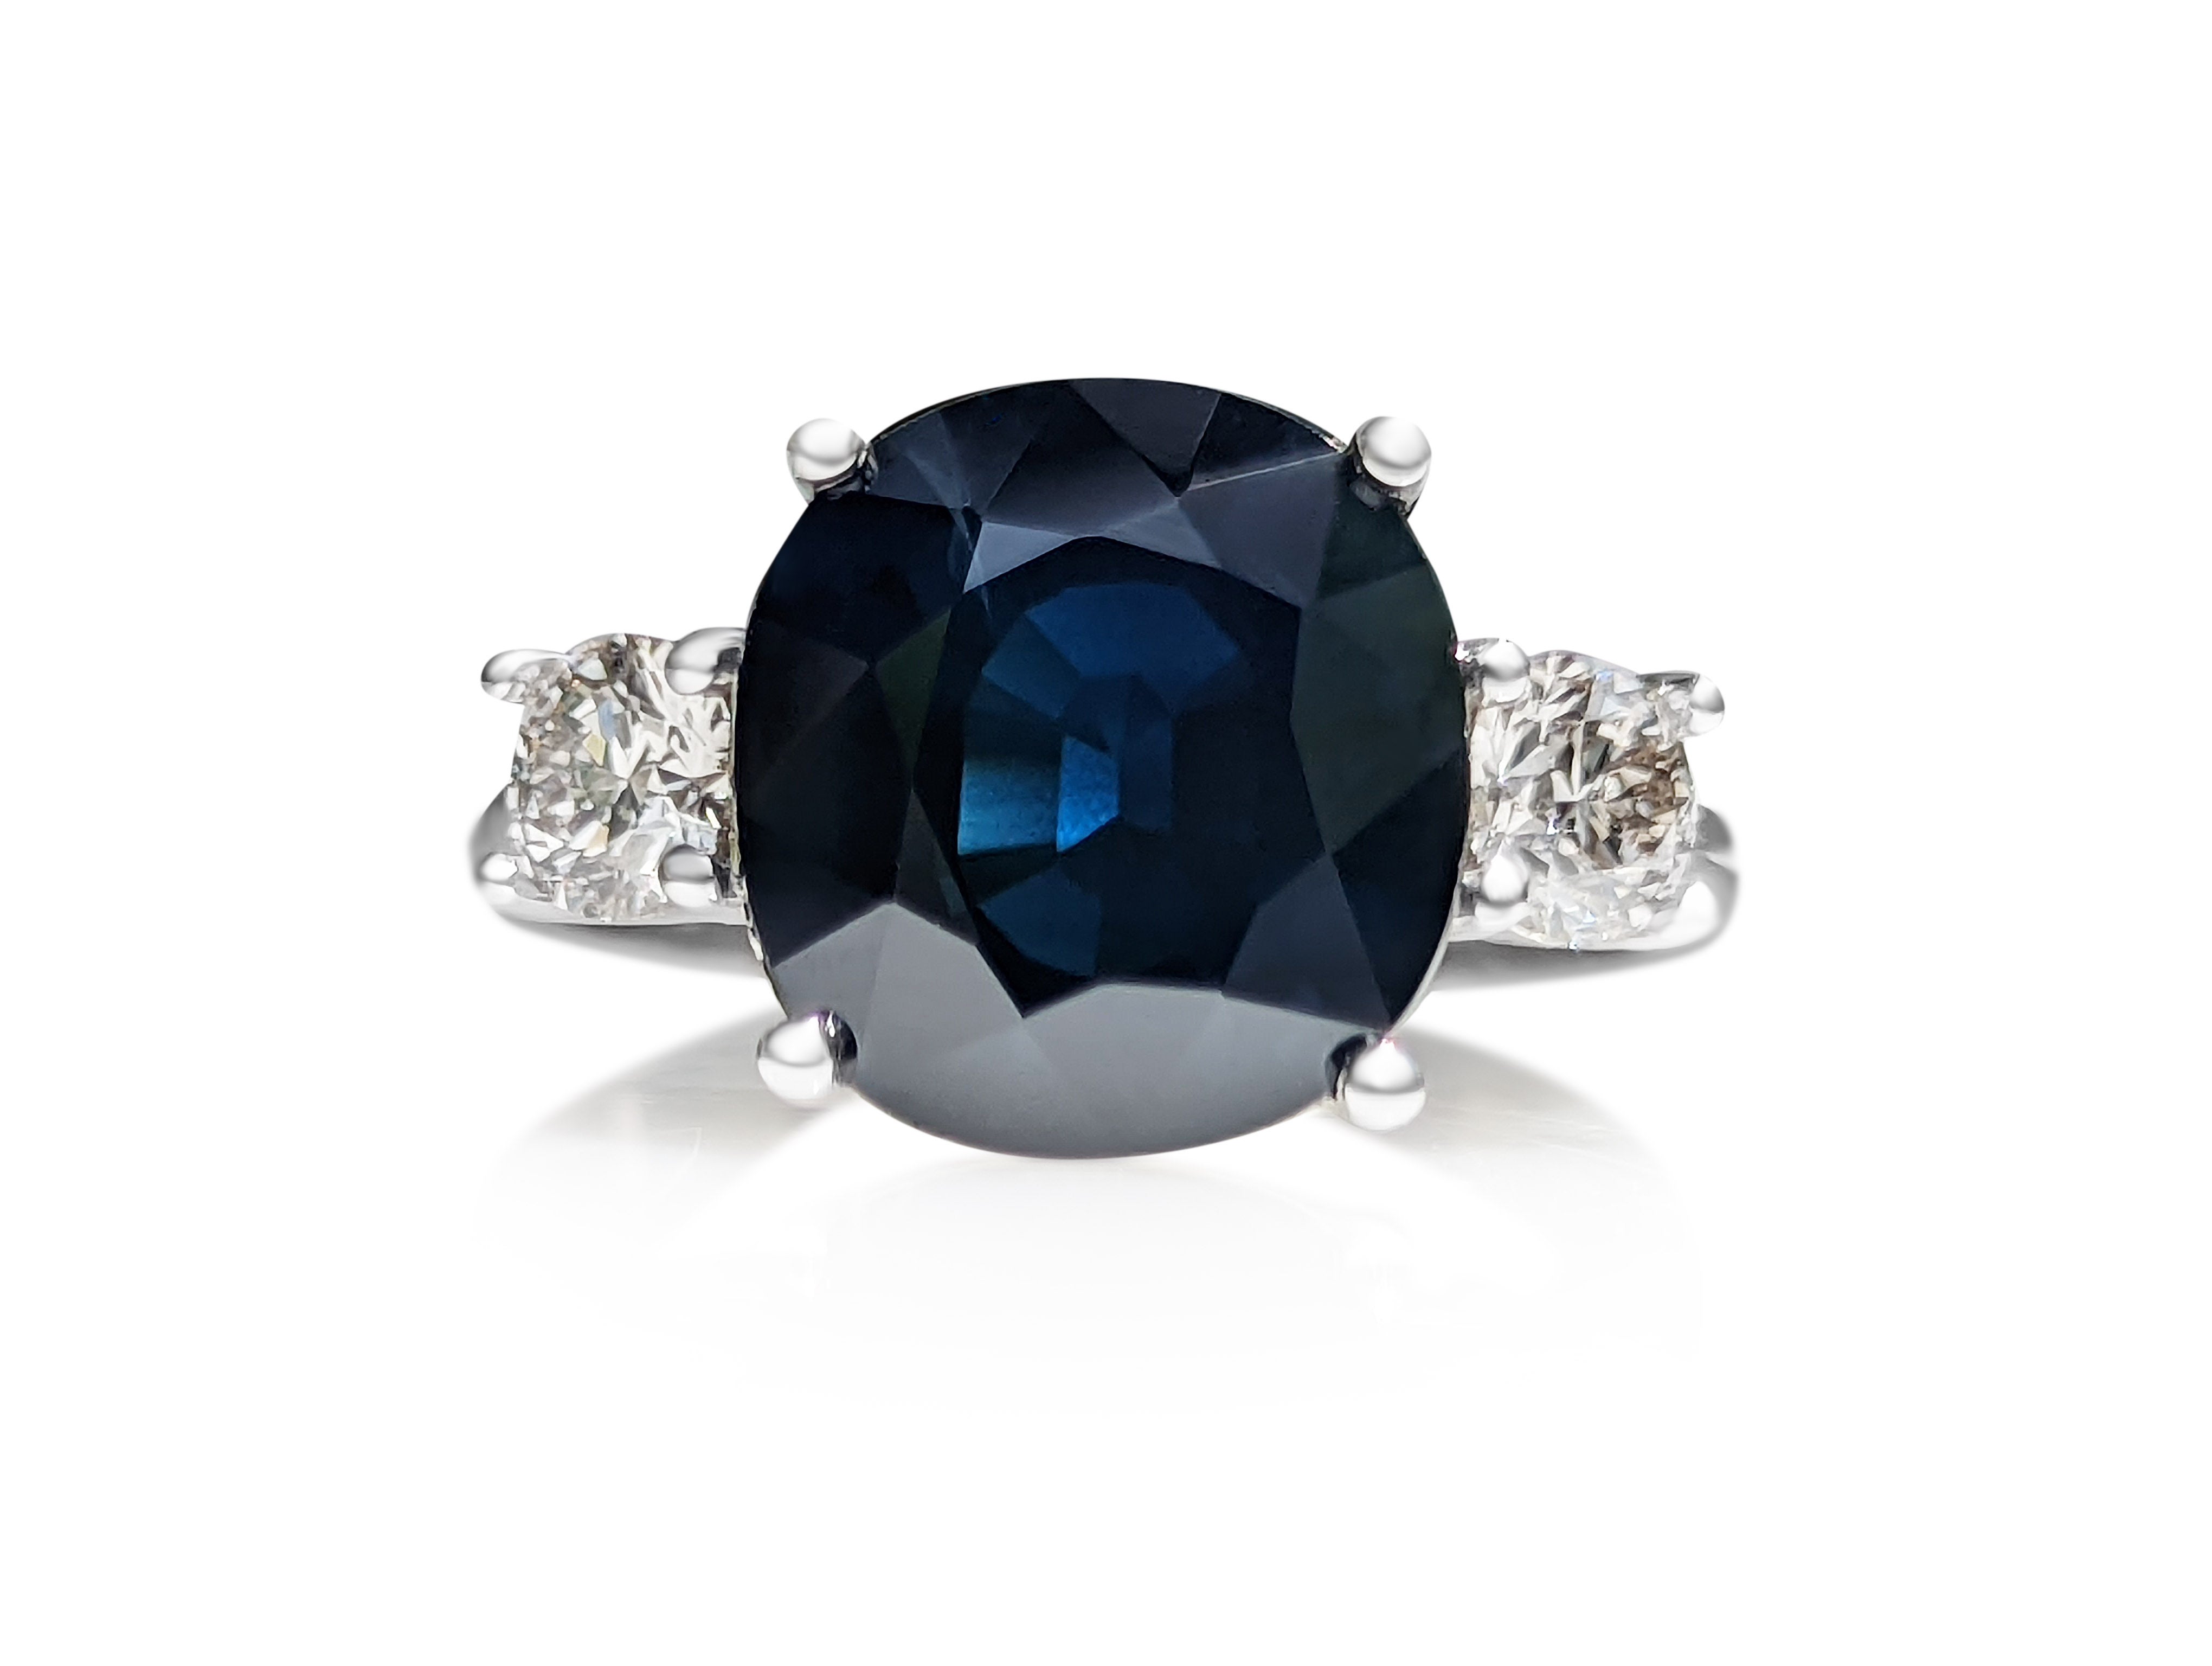 Ring can be sized free of charge prior to shipping out.    

Center Natural Sapphire
Weight: 6.50 ct
Color: Blue
Shape: Cushion Mixed

Side Stones:
Round 2 pieces / 0.62 cttw I-K VS1 Natural Diamonds

Item ships from Israeli Diamonds Exchange,